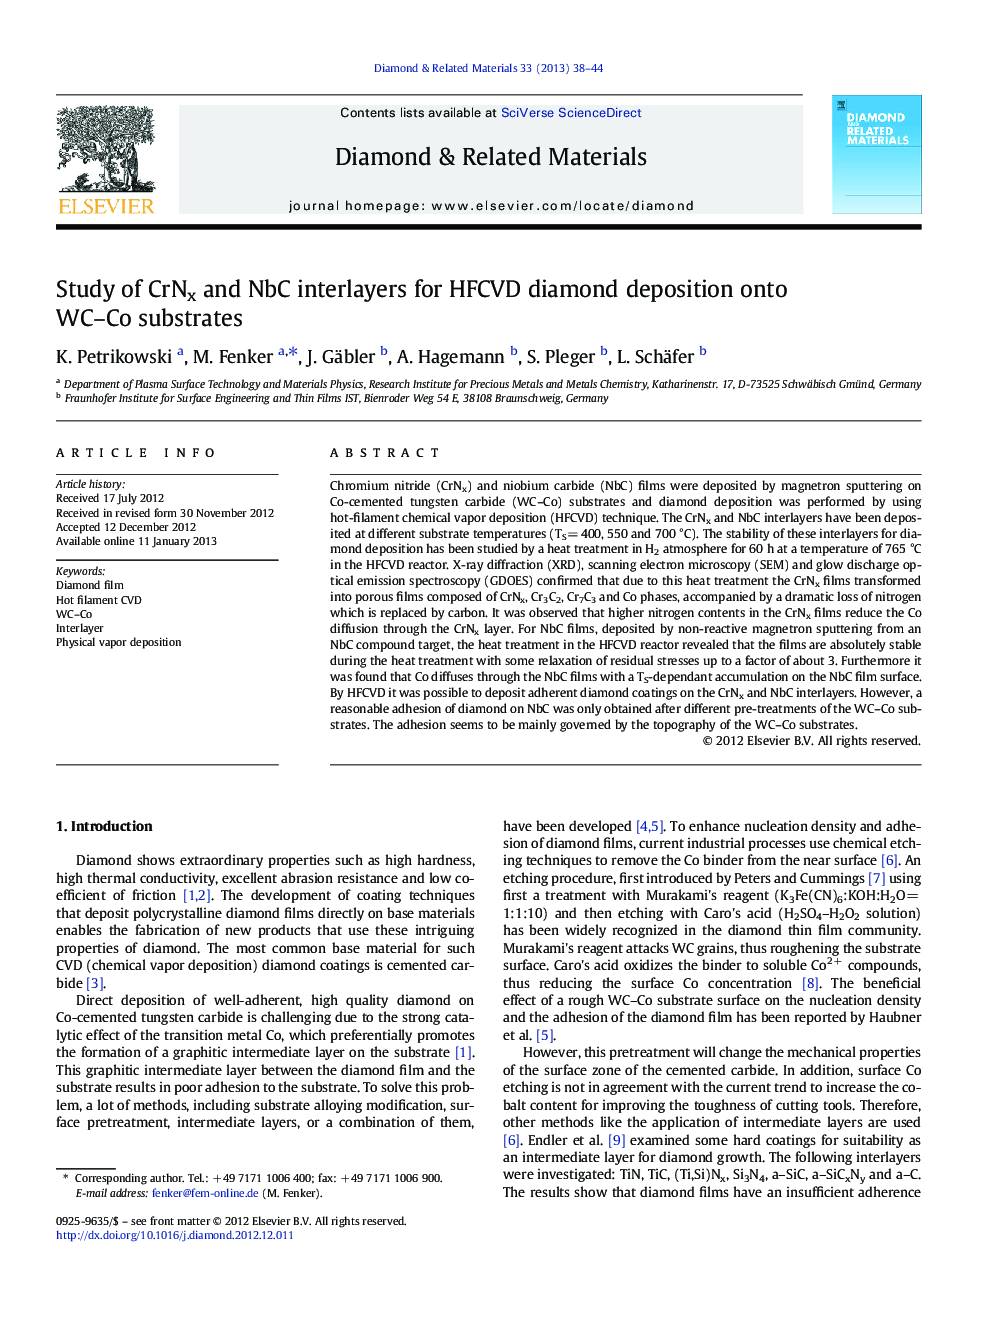 Study of CrNx and NbC interlayers for HFCVD diamond deposition onto WC–Co substrates